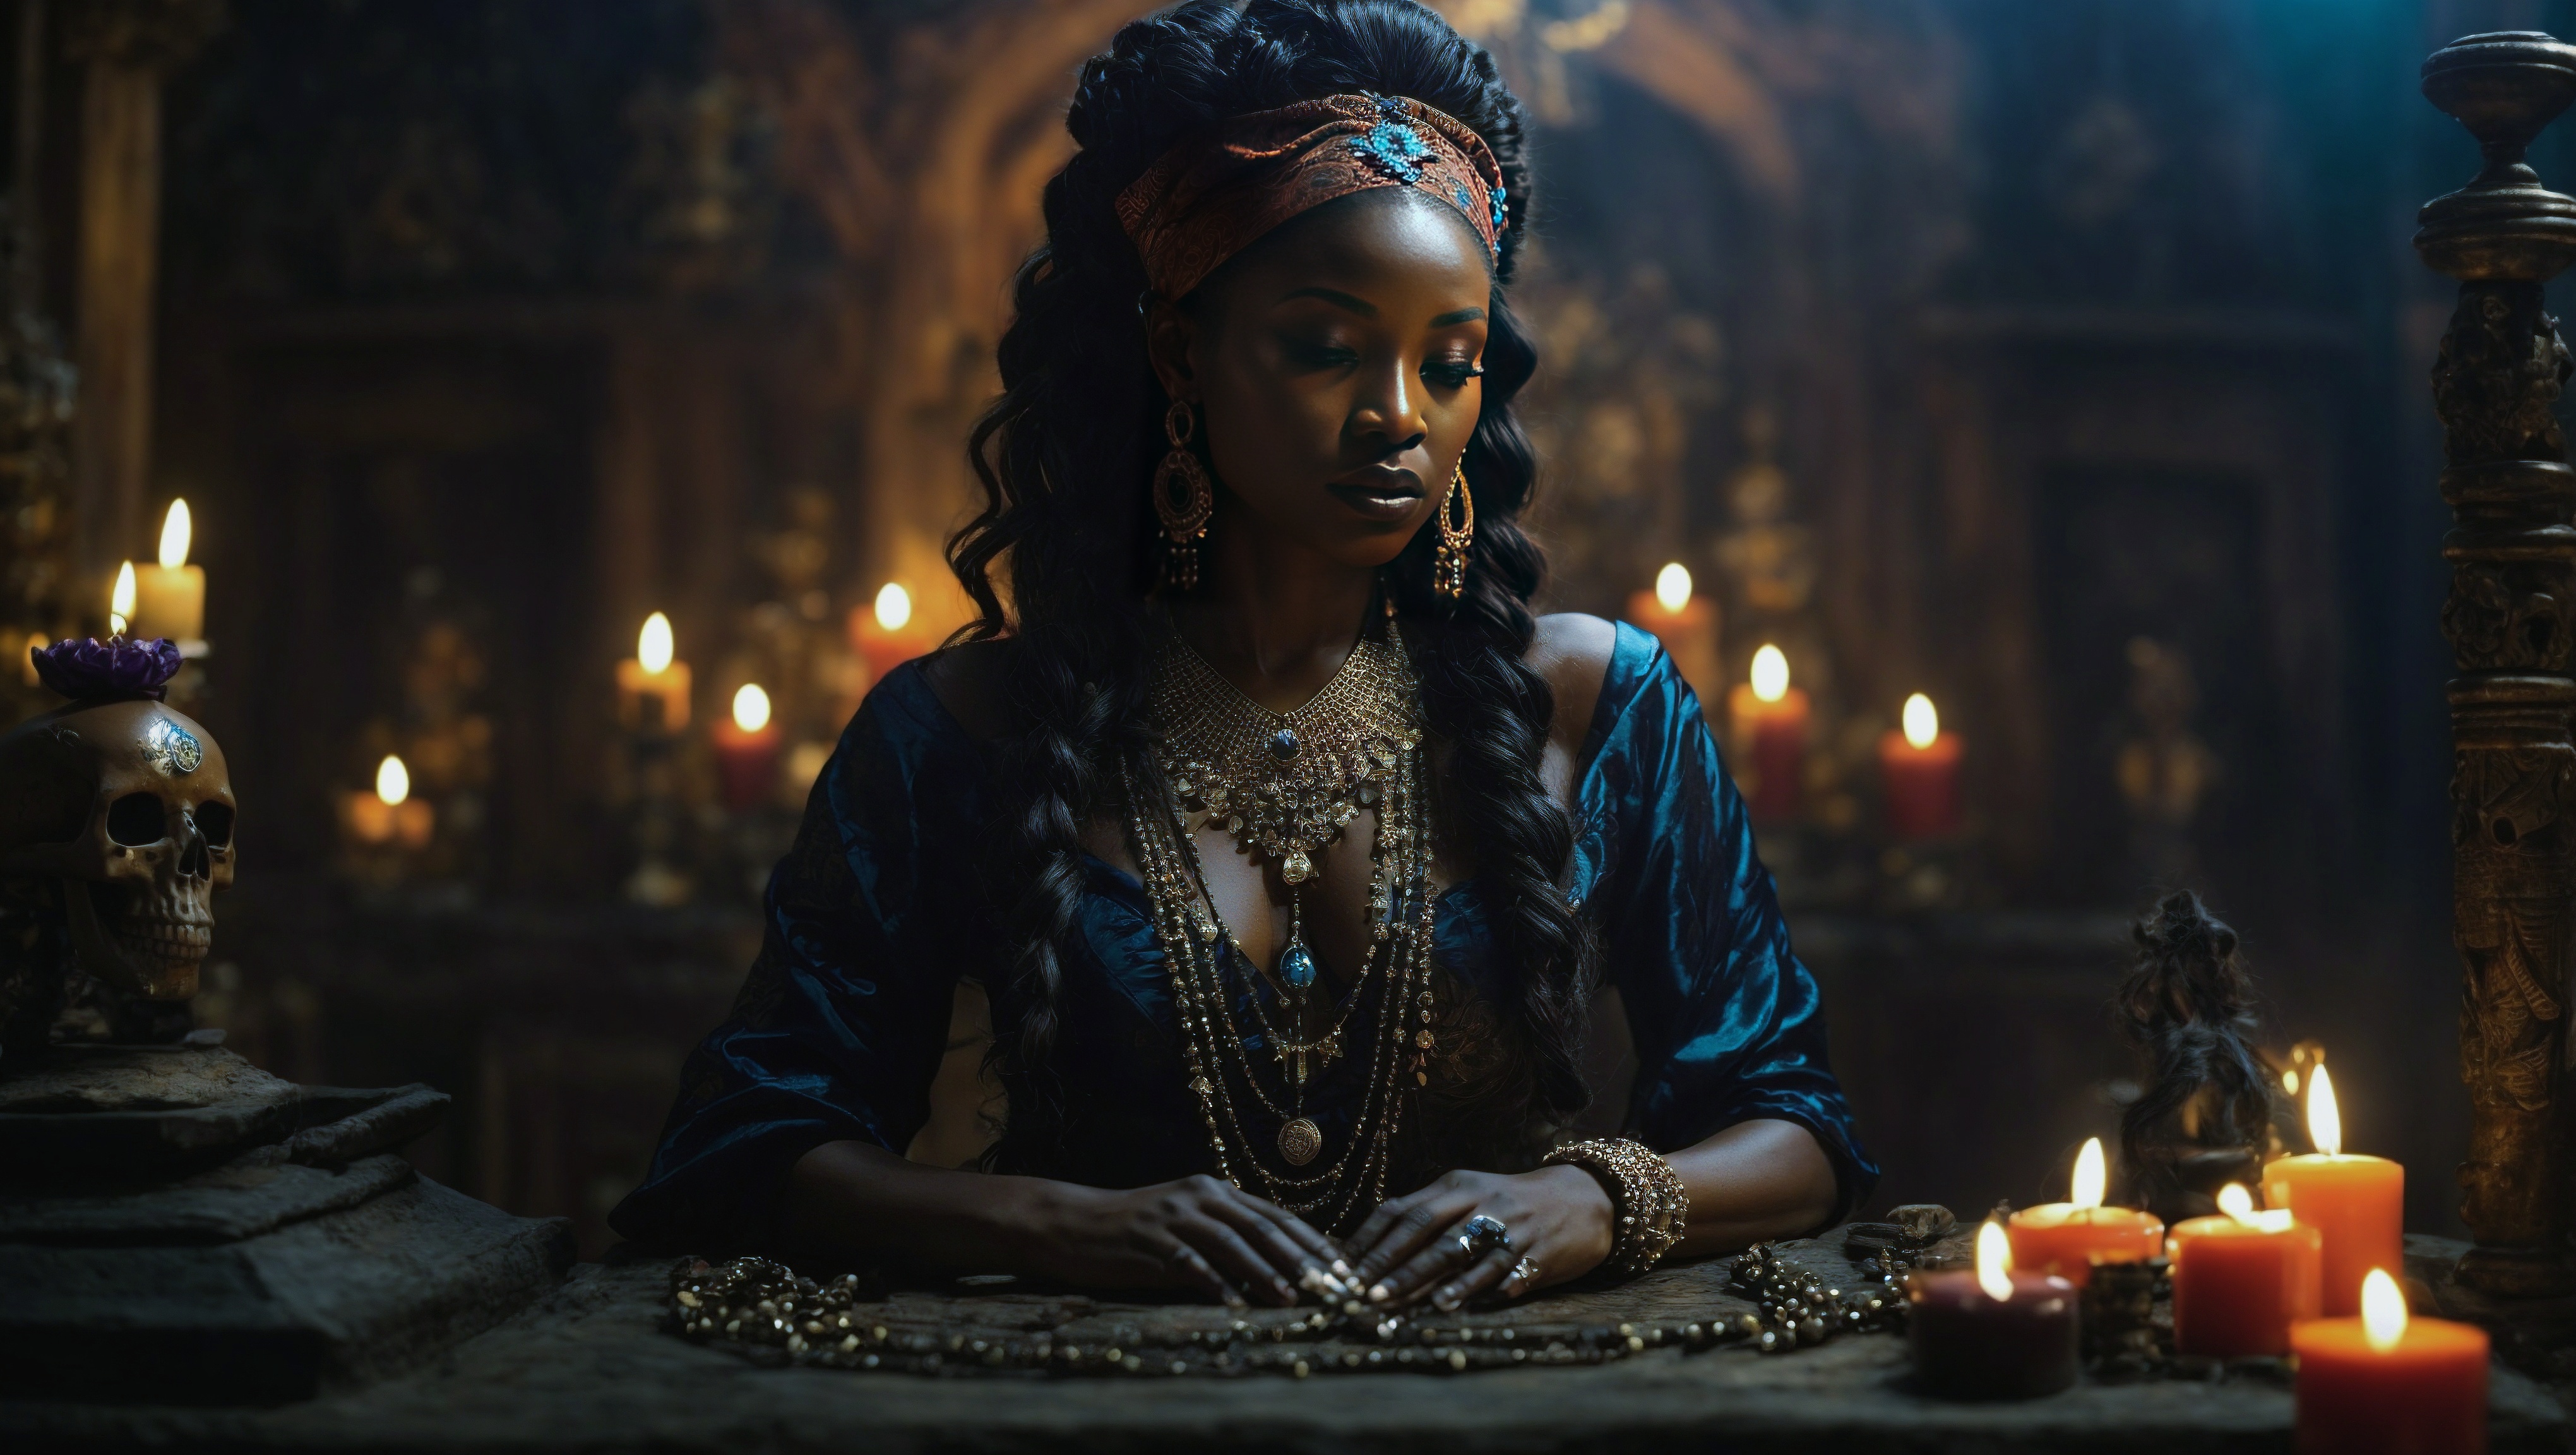 Free photo A woman in renaissance dress and tiara sits at a table with candles